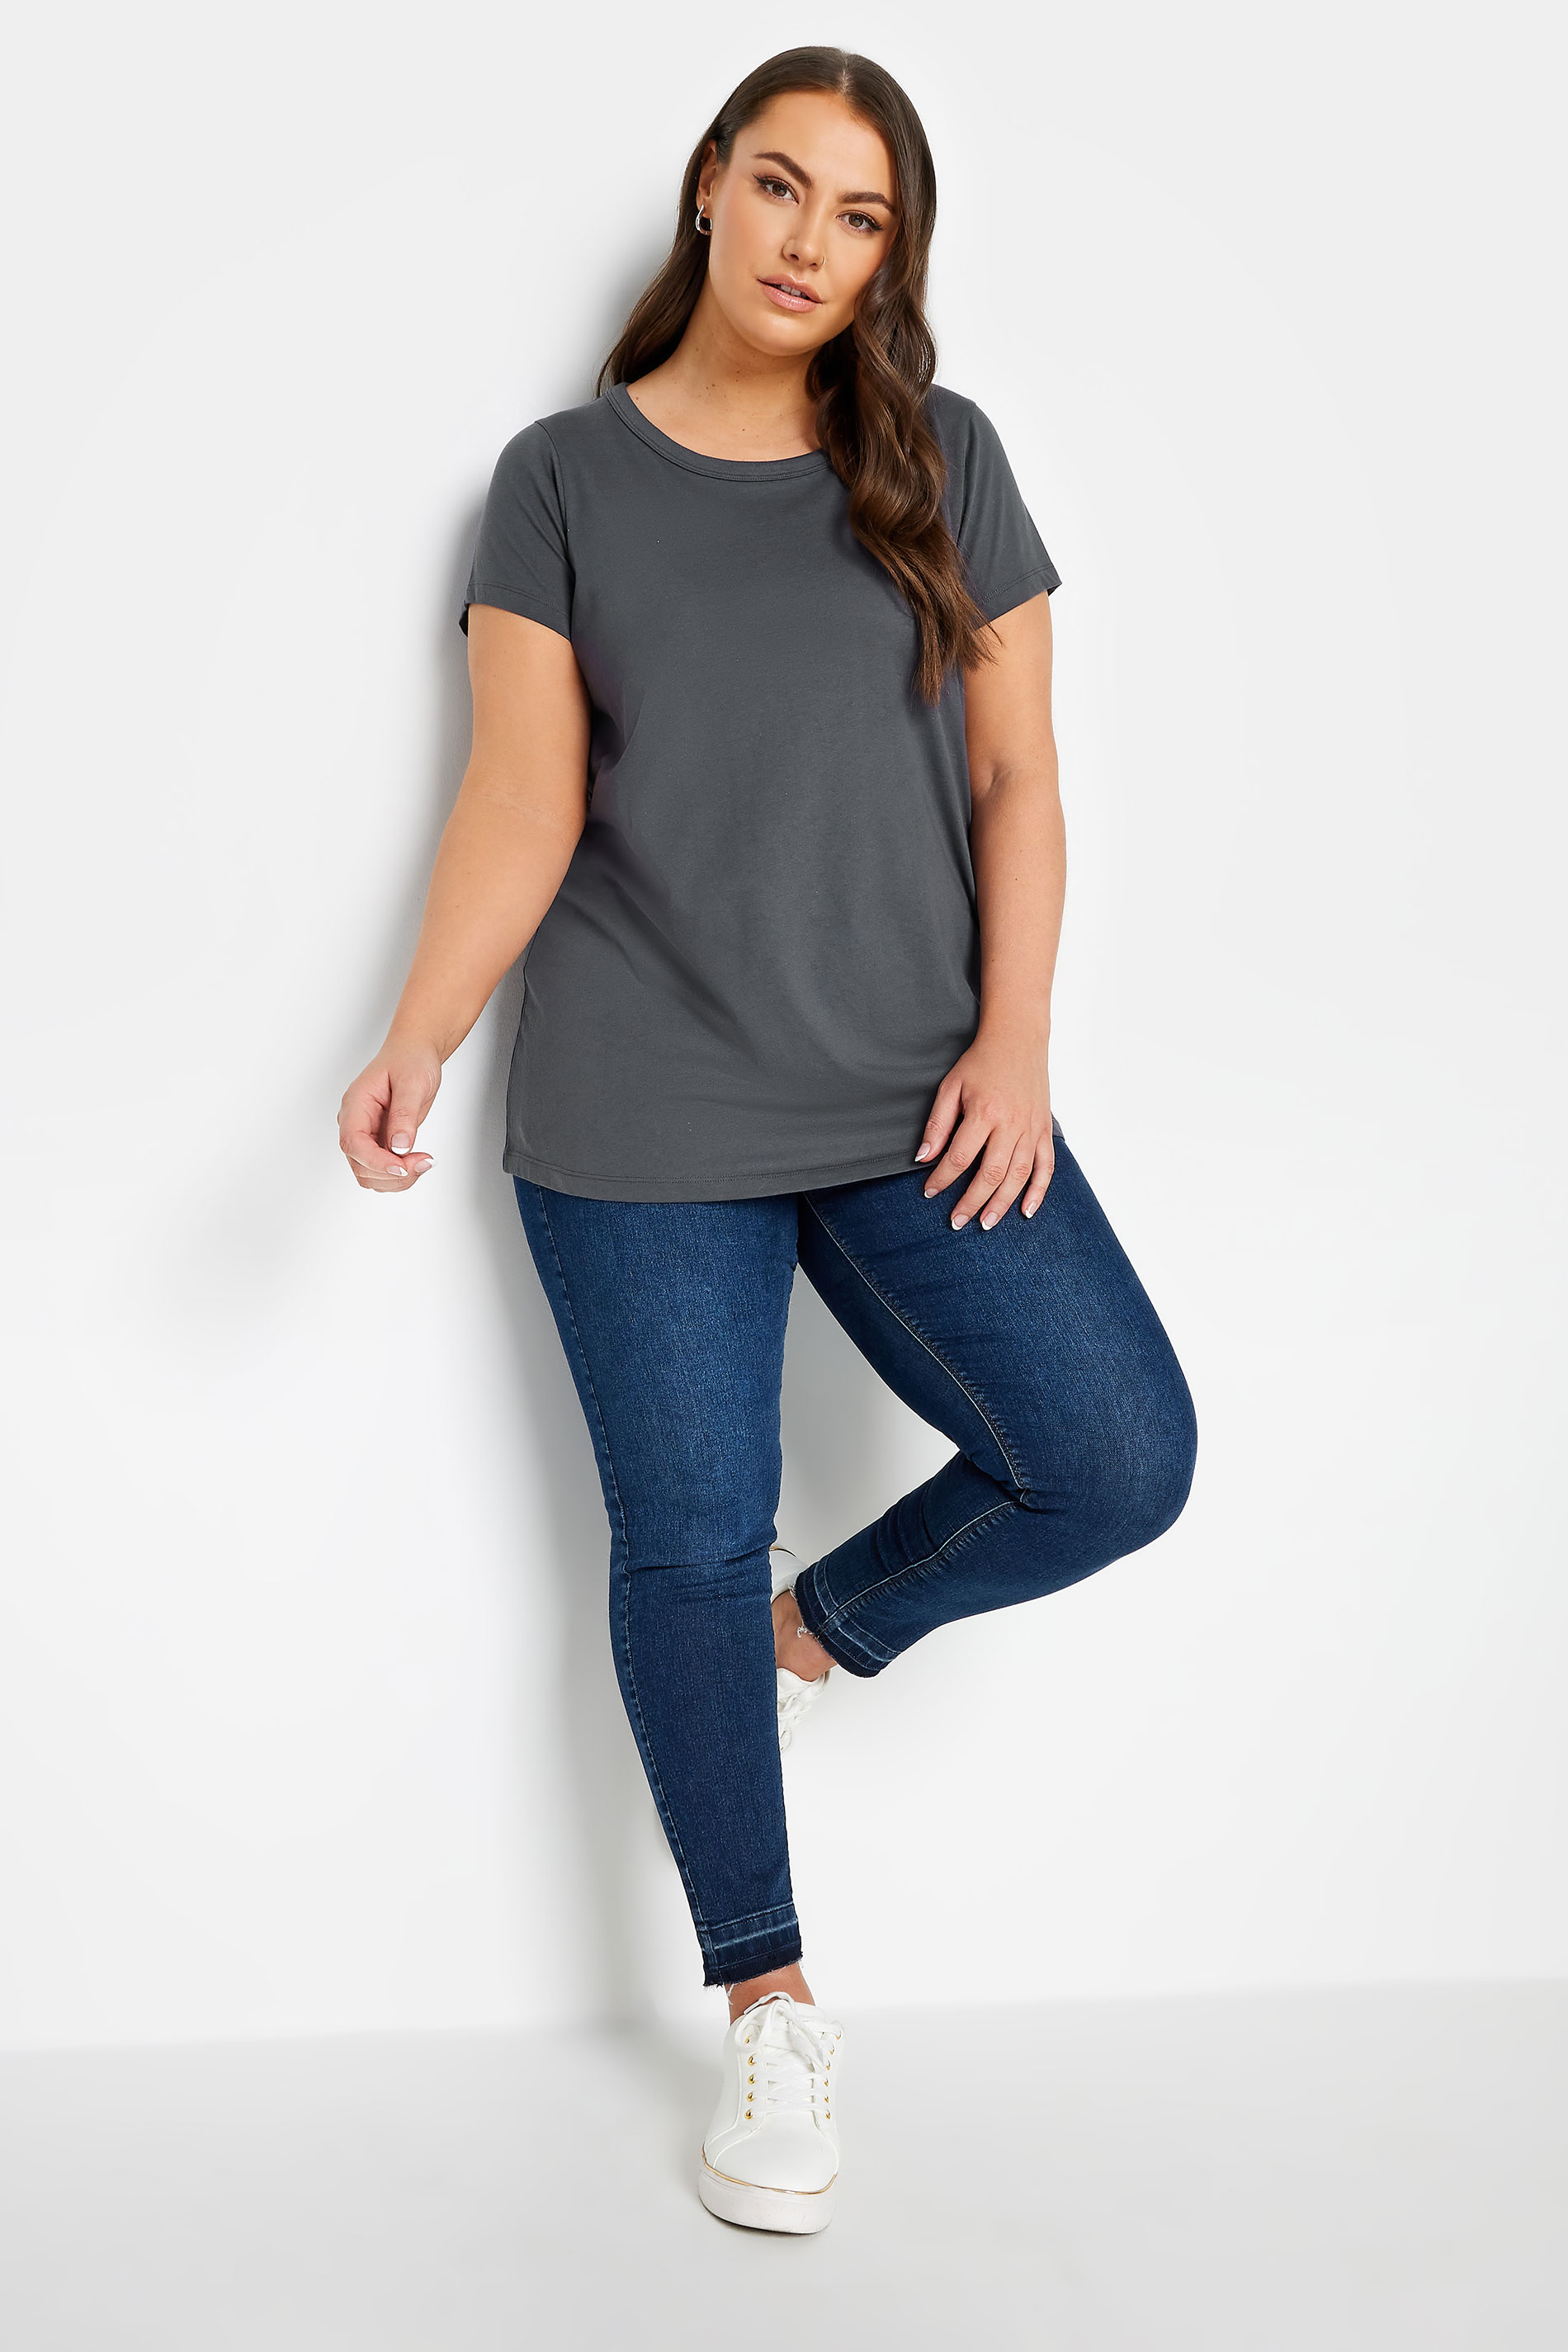 YOURS Plus Size Charcoal Grey Essential T-Shirt | Yours Clothing 2